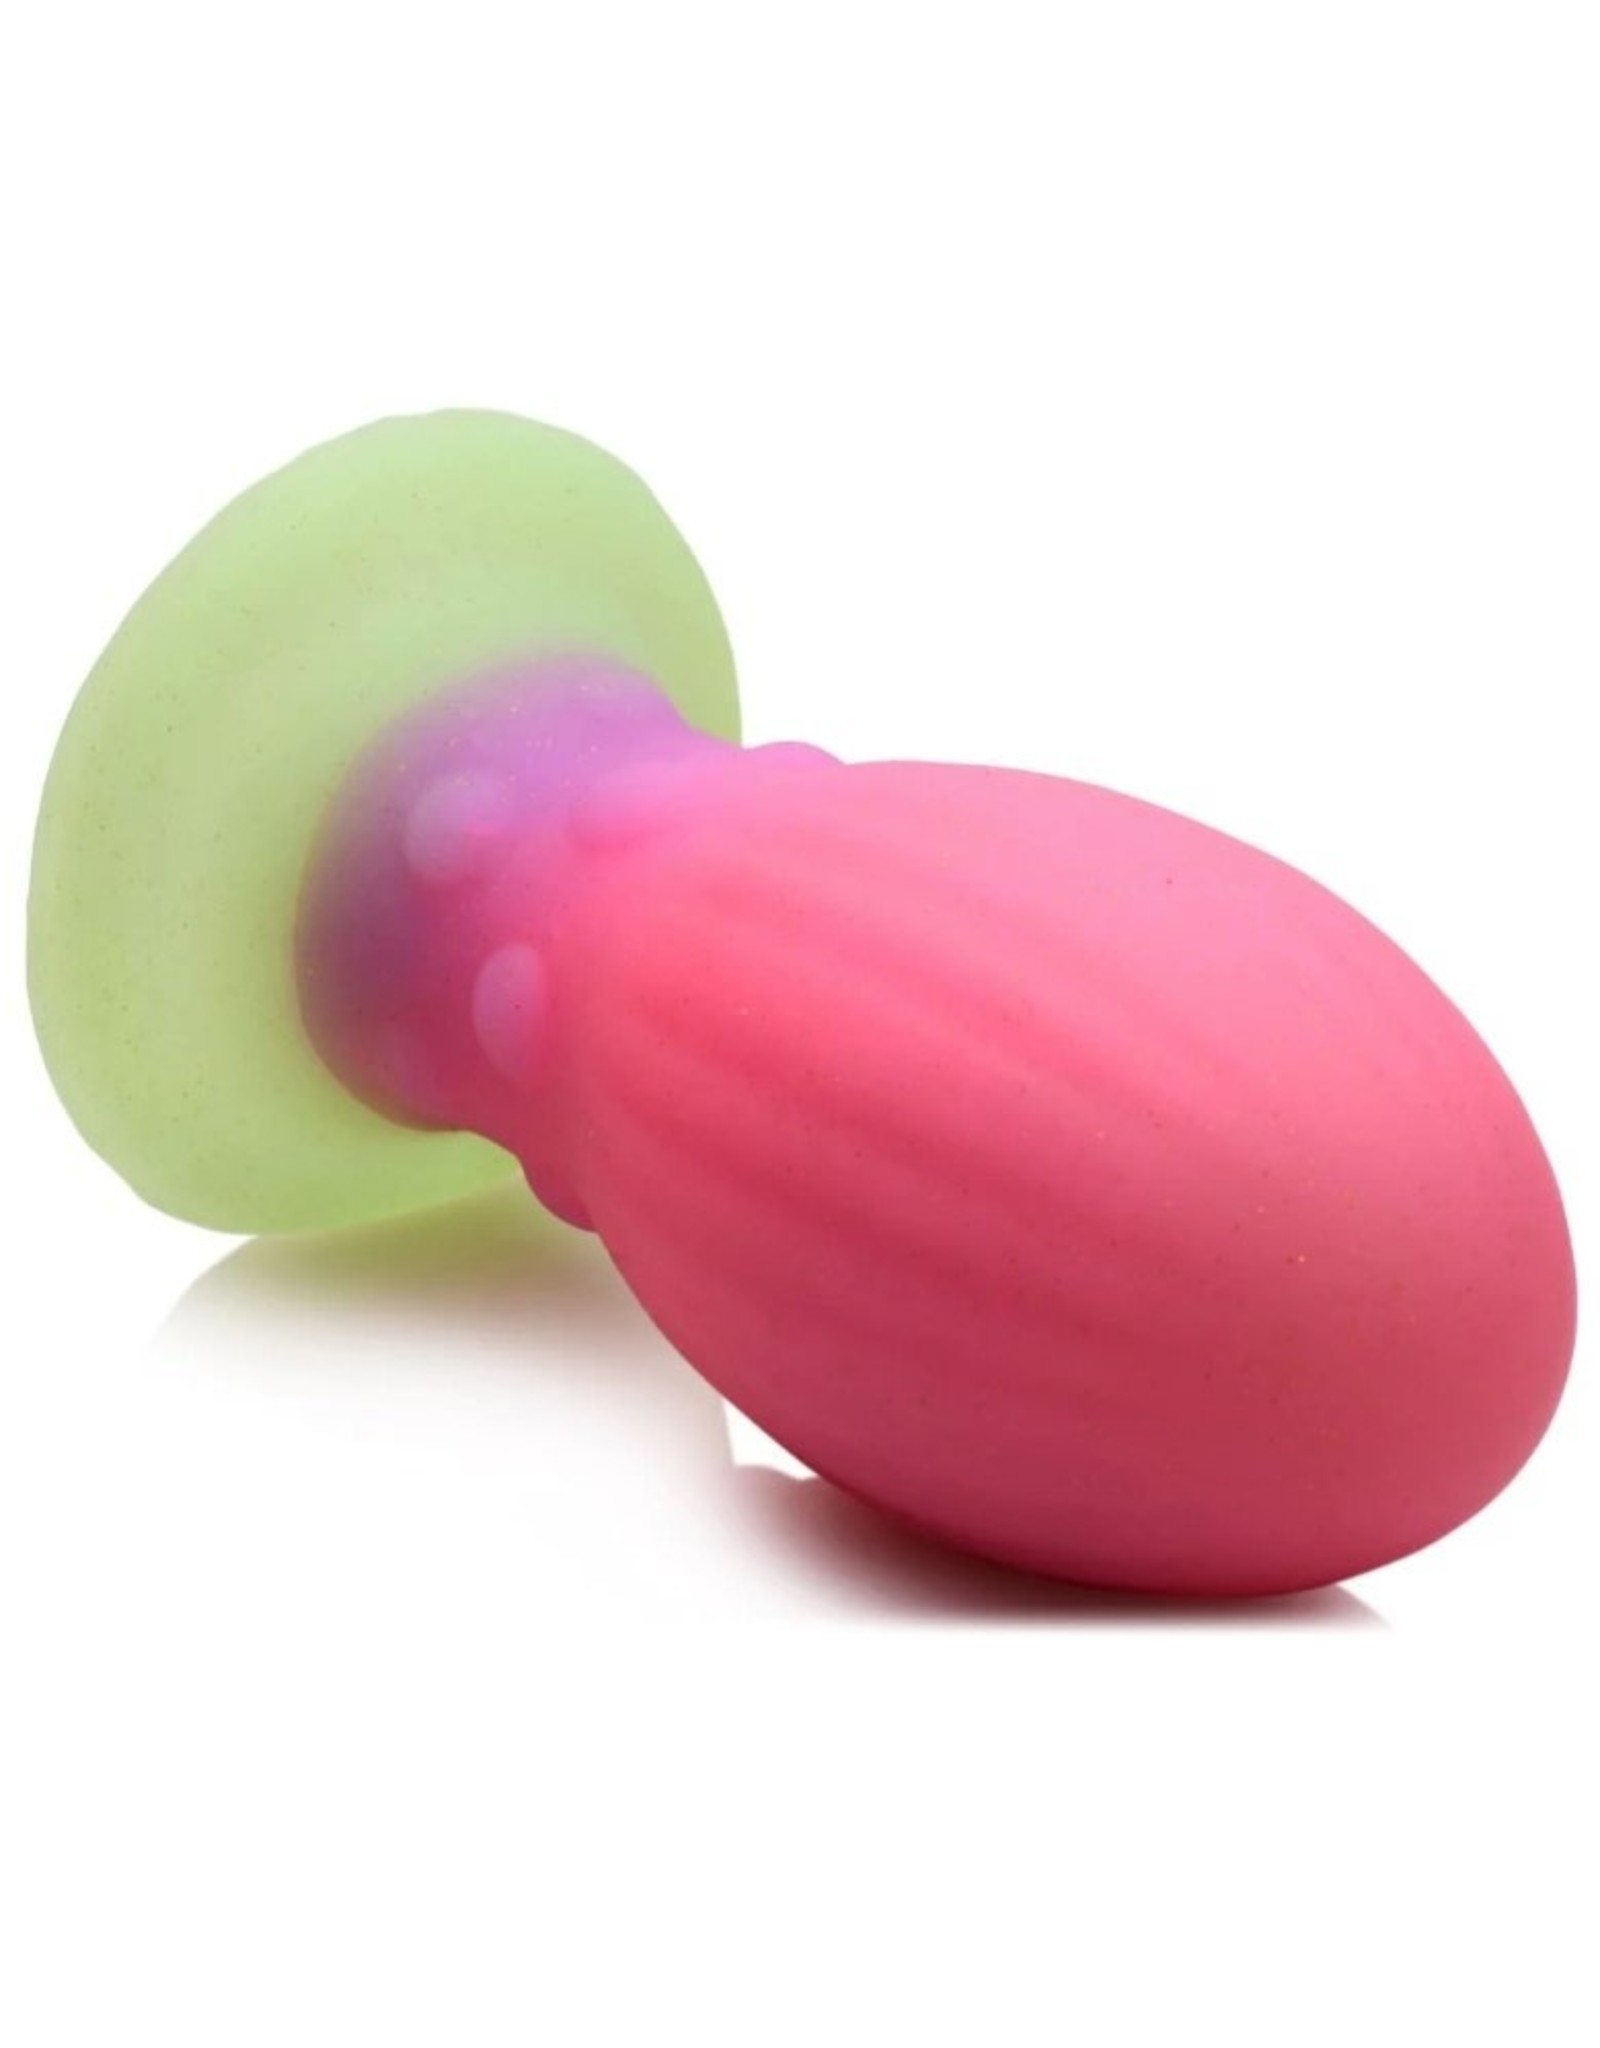 XR Brands Creature Cocks - Xeno Egg - Glow In The Dark - Large